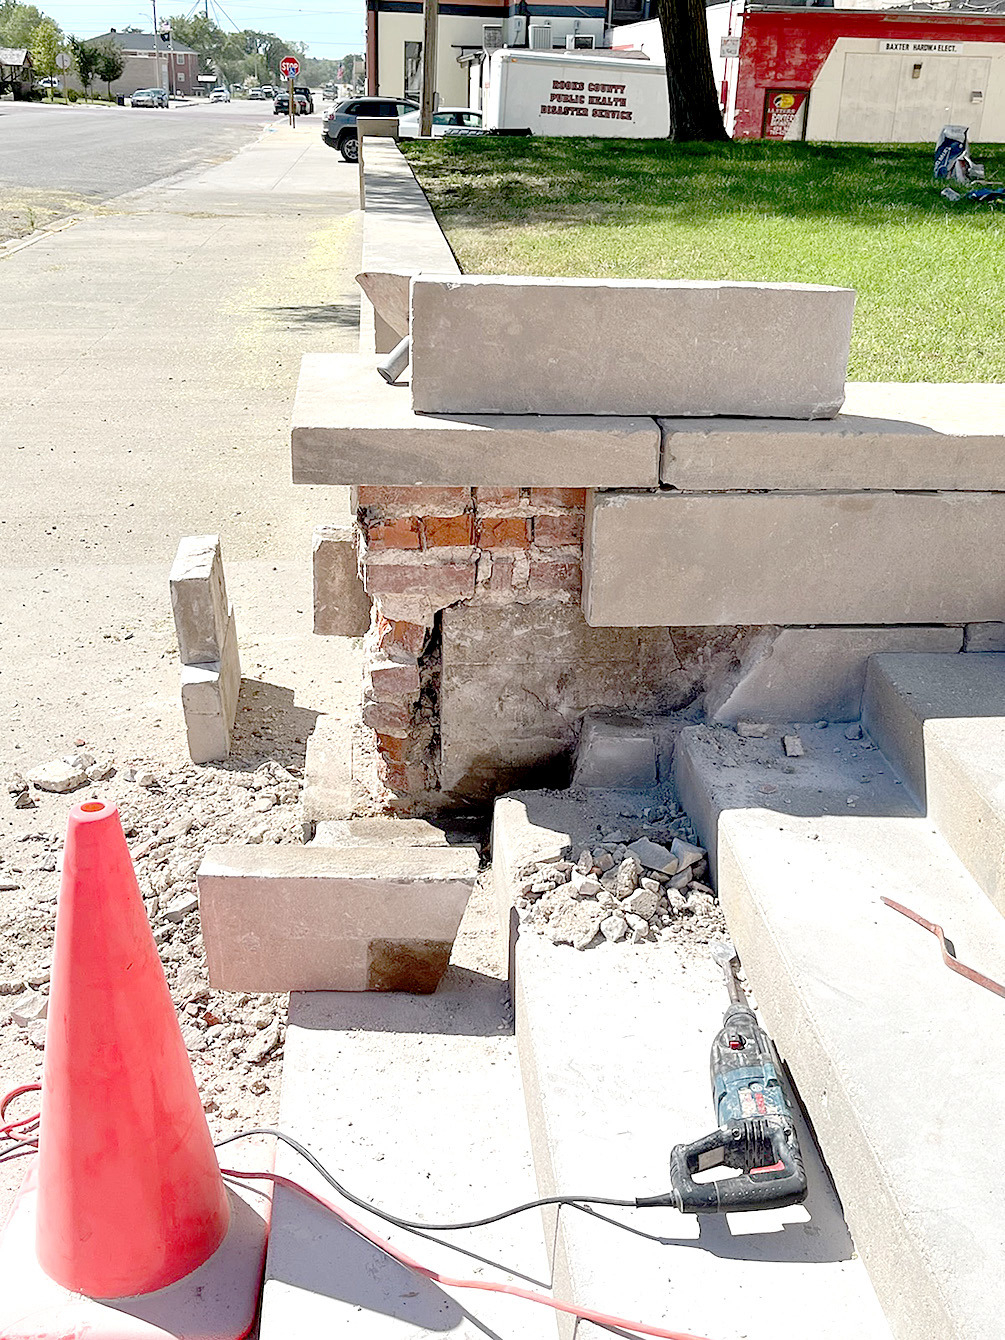 ONE OF THE MANY REPAIRS being done at the Rooks County Courthouse is to the stone wall and steps going into the building. Jakob Stockton reconstructed one of the pillars by taking it apart and setting the stones back in place and filling in the missing pieces.